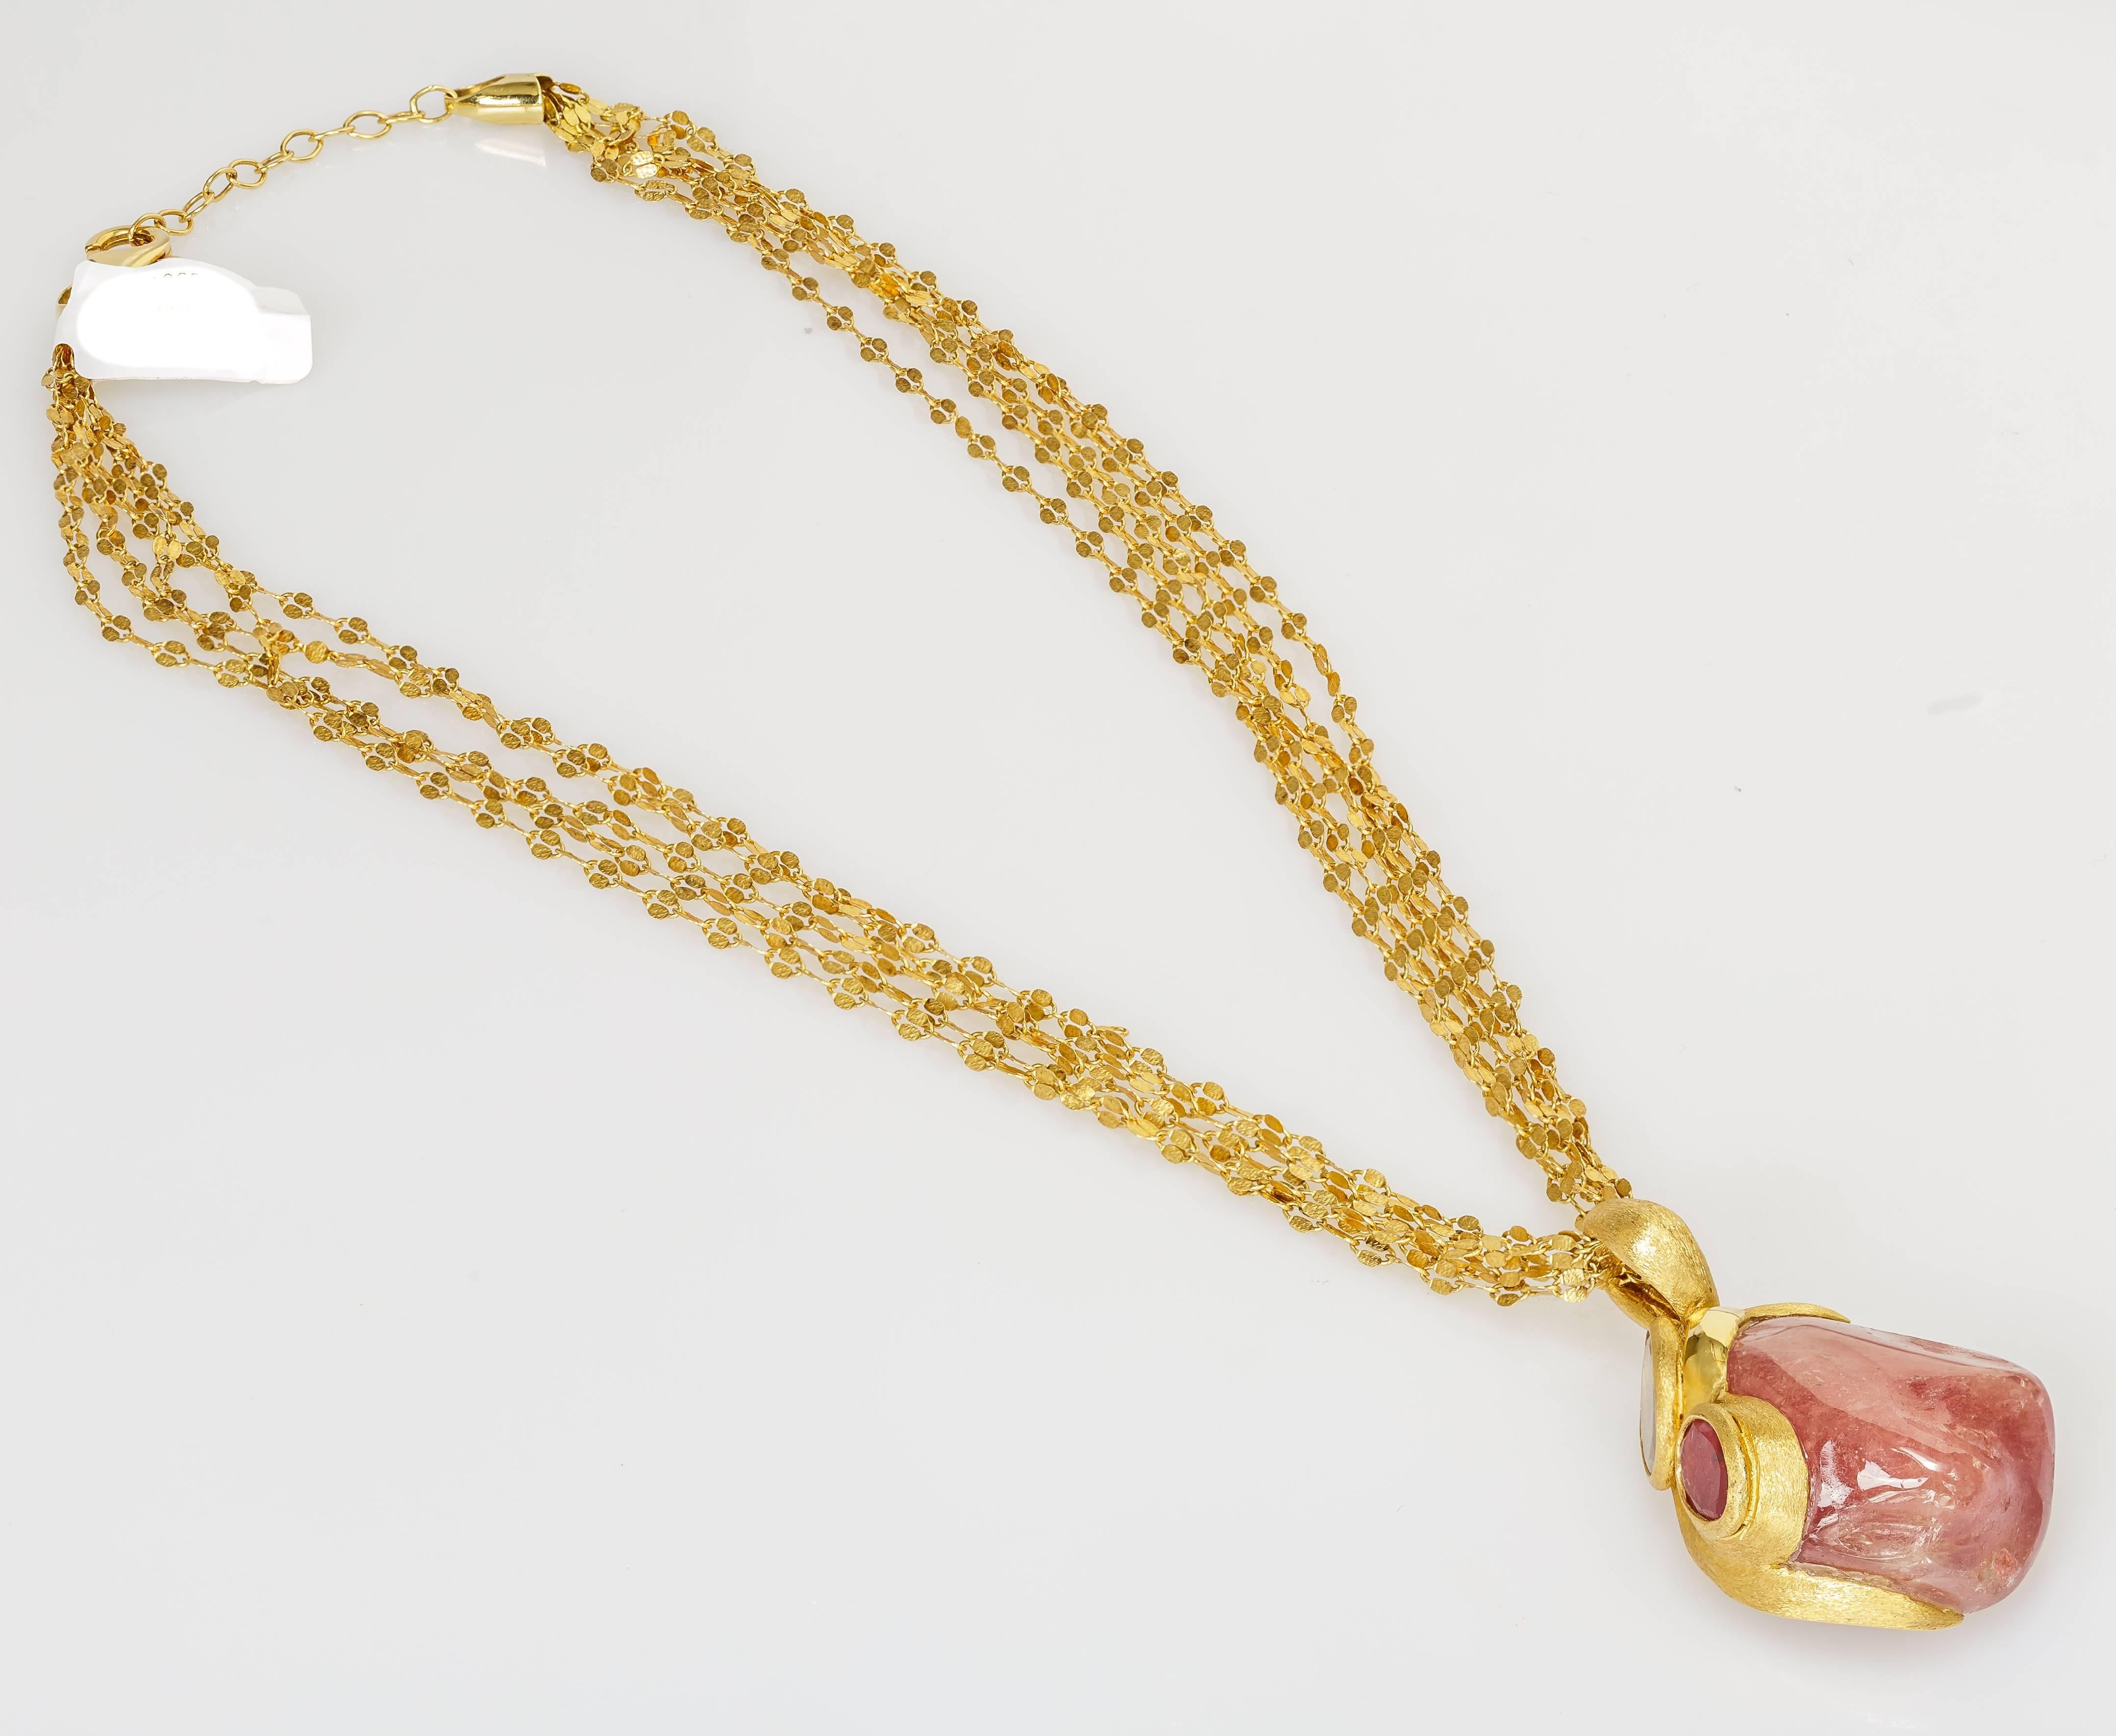 This Yvel necklace features a tumbled natural reddish pink fancy colored sapphire on an 18k yellow gold pendant with two smaller sapphires.  The pendant hangs from an 18 inch 18k yellow gold multi-strand chain.